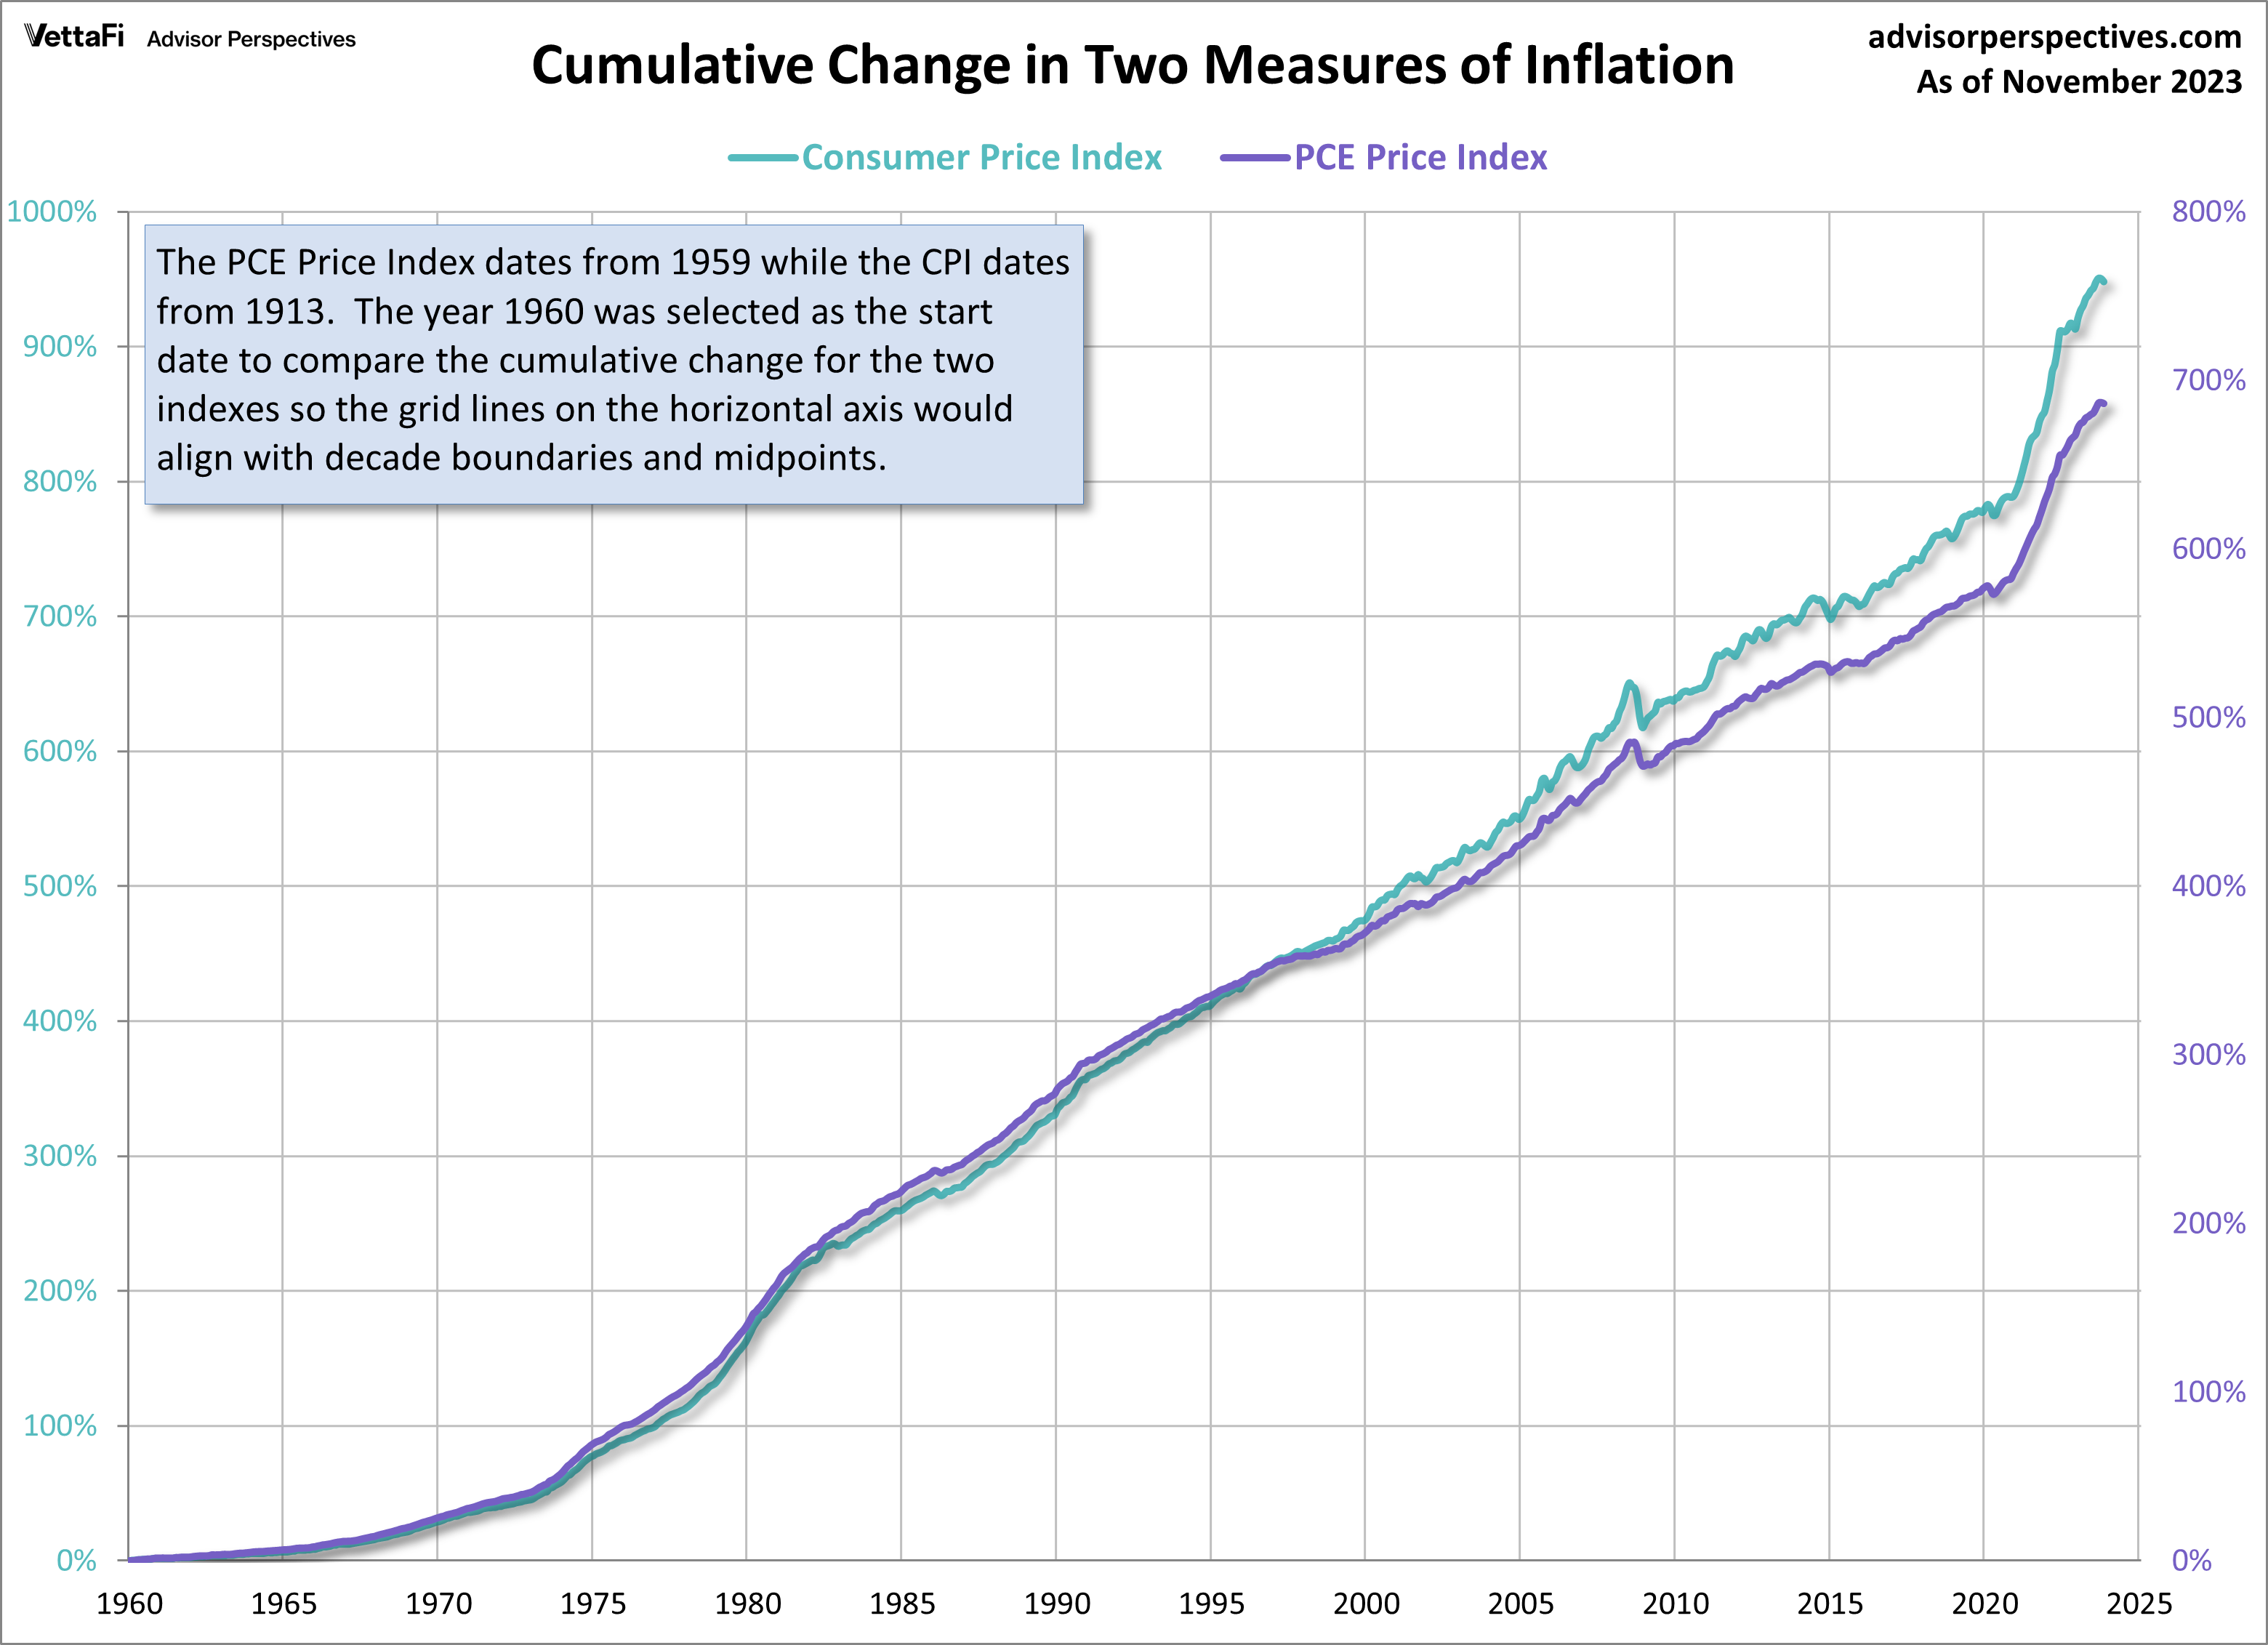 Cumulative Change in 2 Measures of Inflation